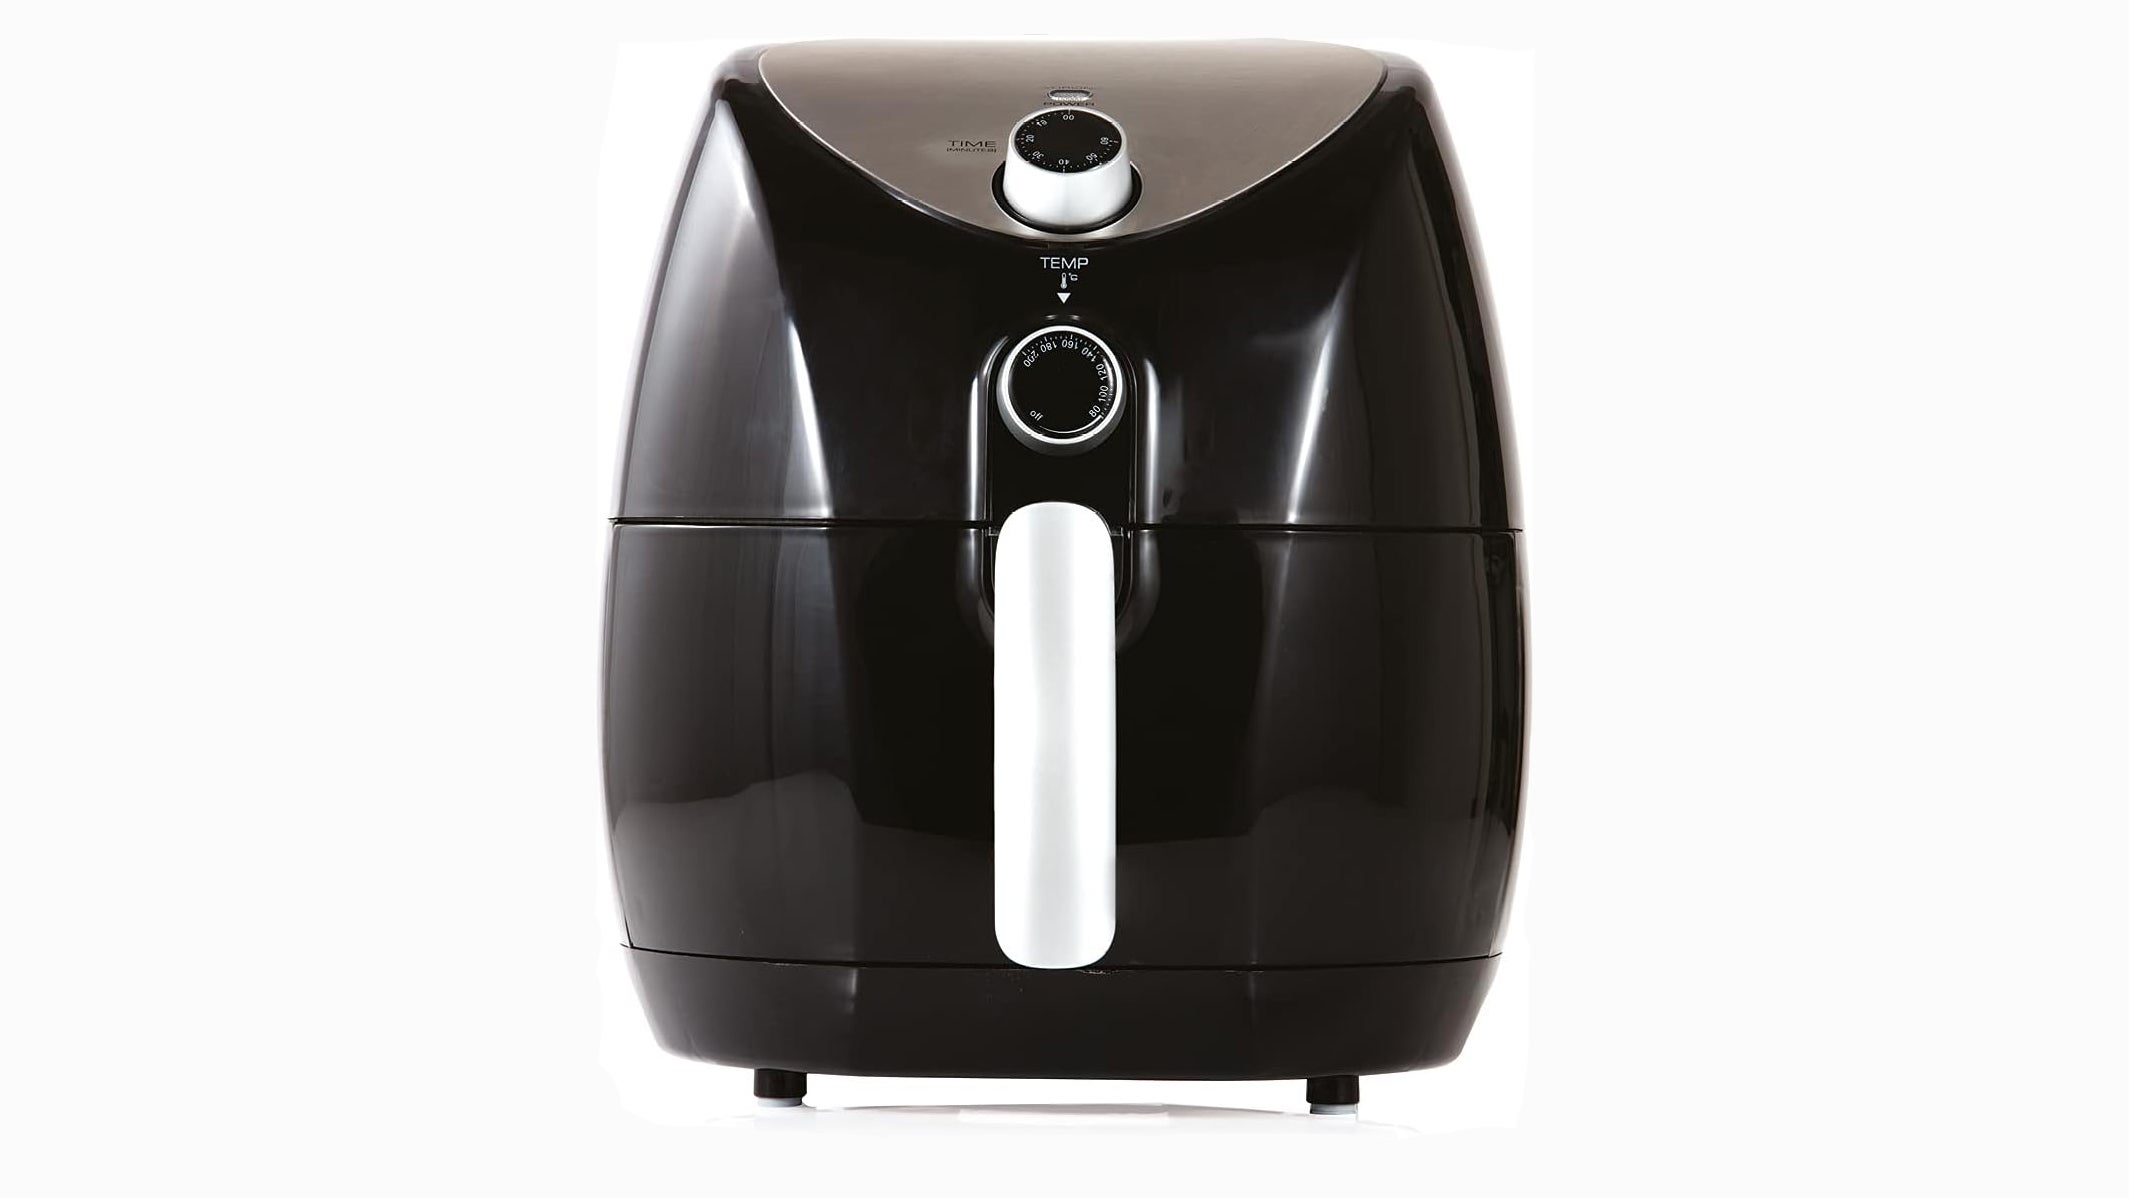 Prime Day deals live - Tower air fryer